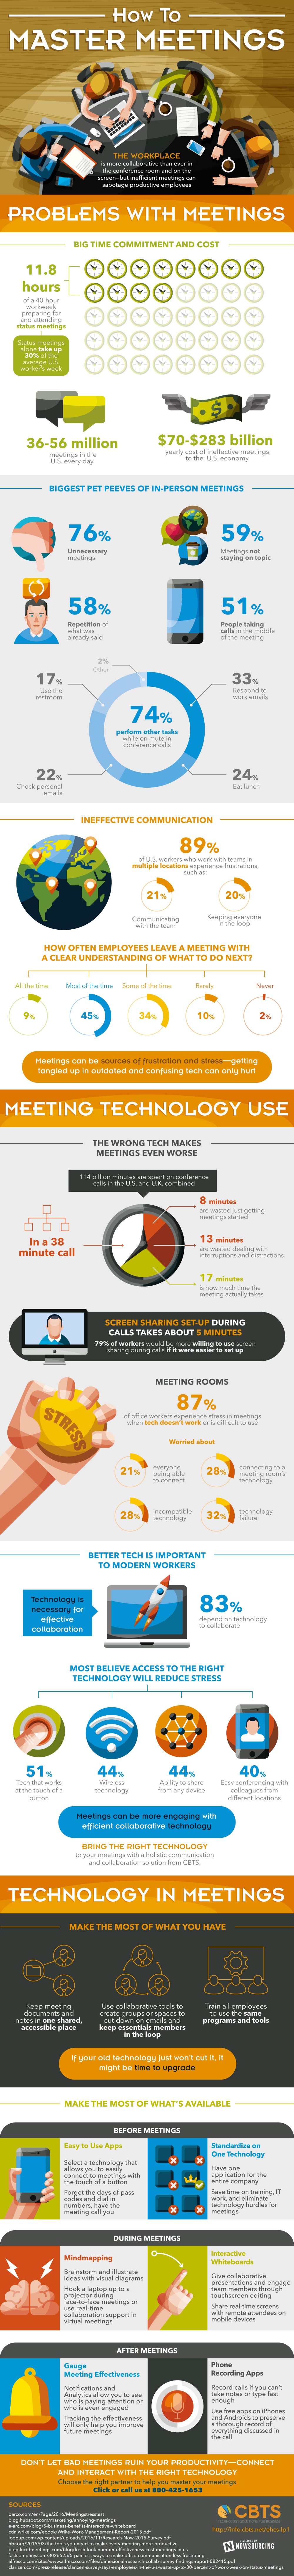 How To Master Meetings